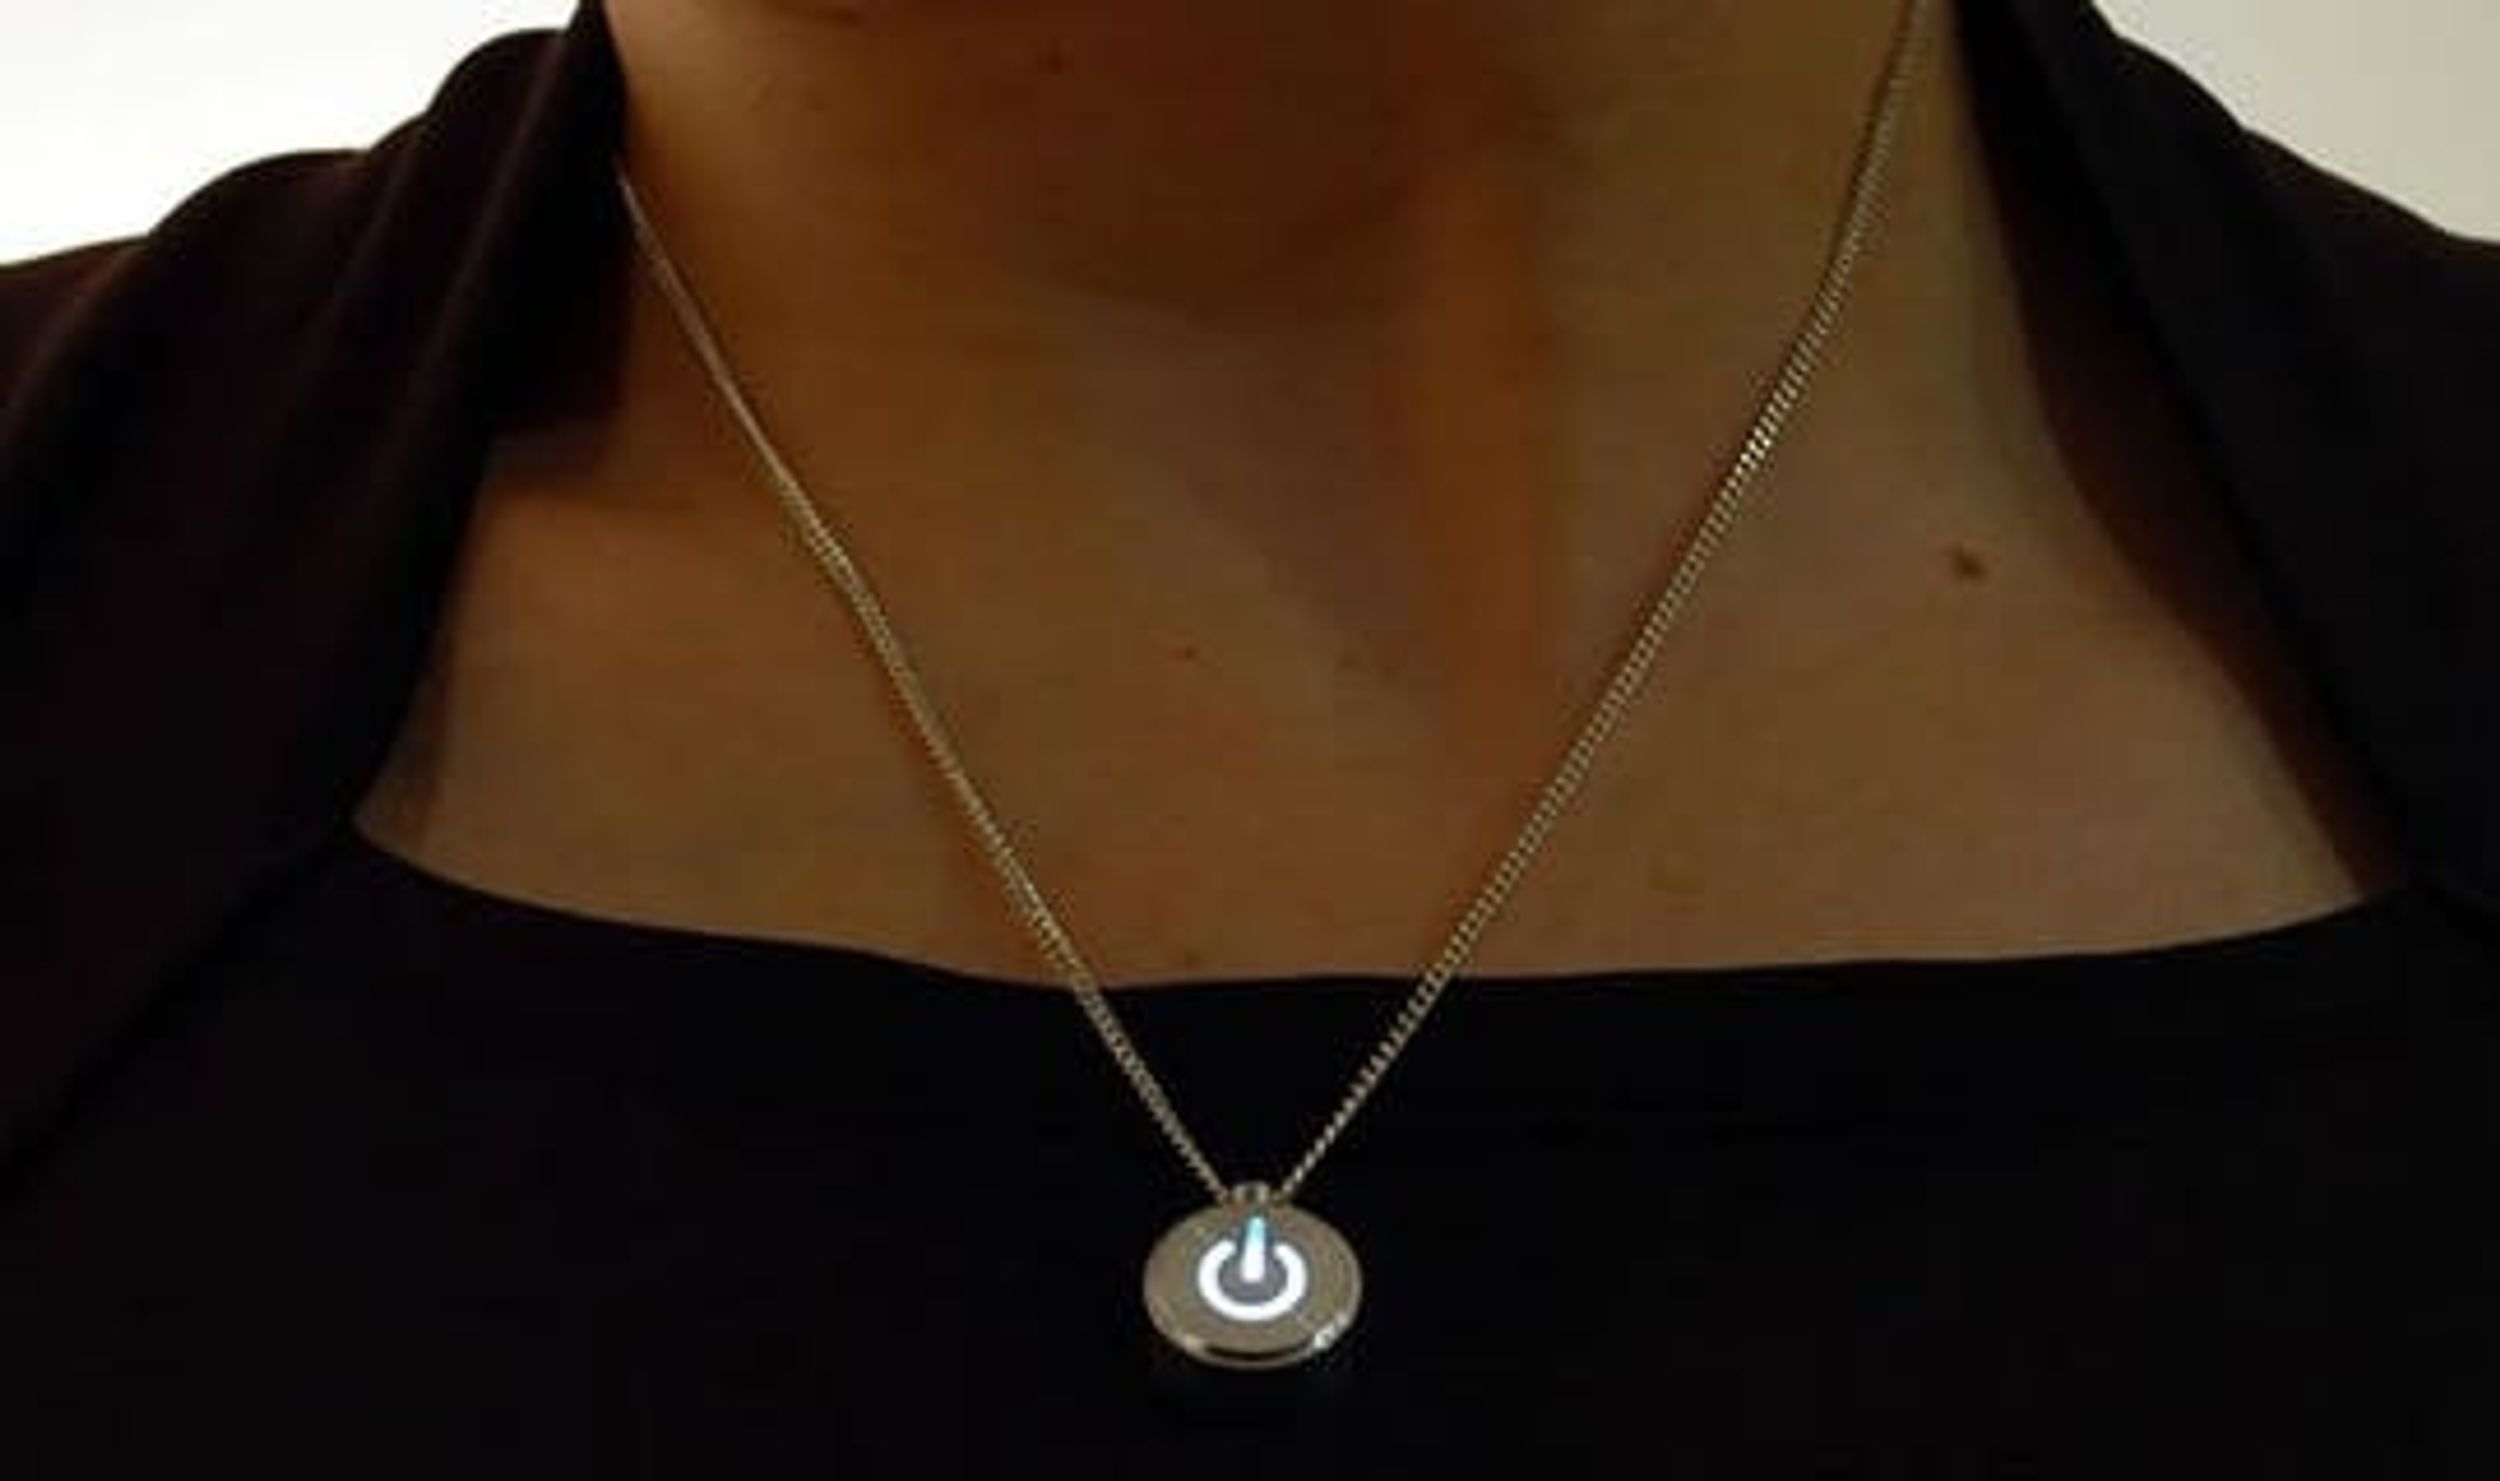 Wearable Tech: The iNecklace and iCufflinks